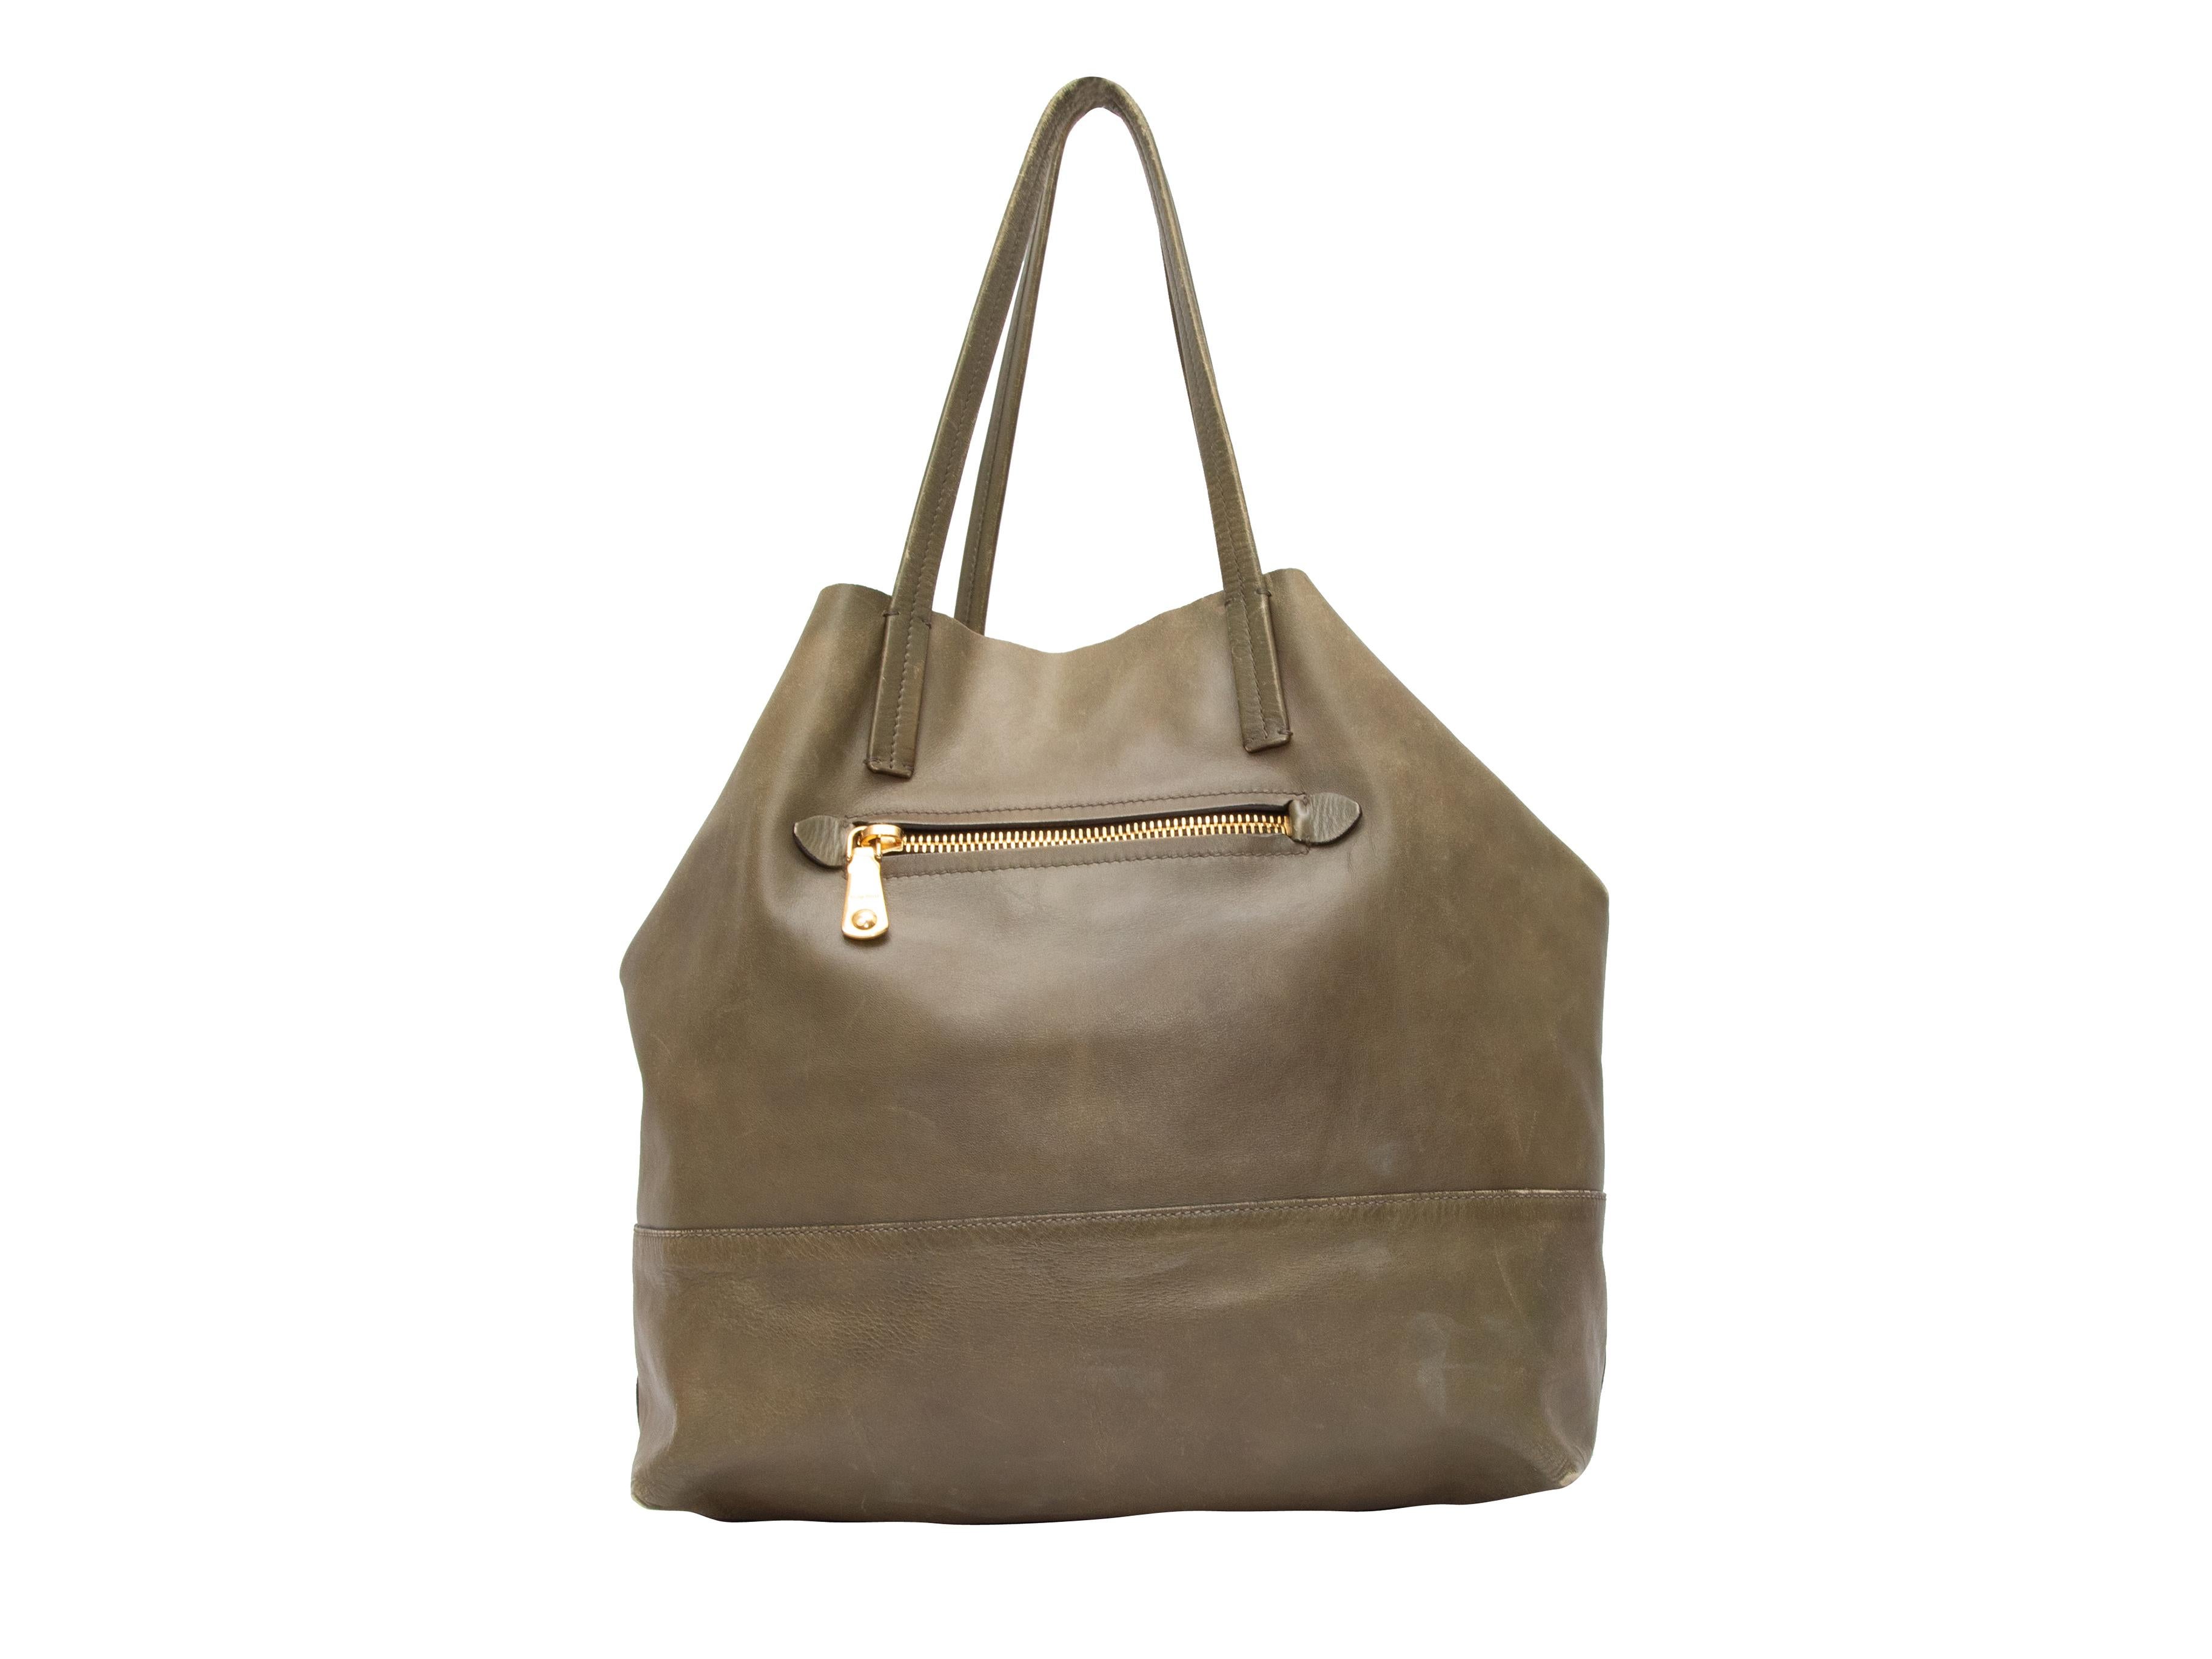 Olive Miu Miu Leather Tote Bag. This tote bag features a leather body, gold-tone hardware, a single front zip closure pocket, and dual flat top handles. 17